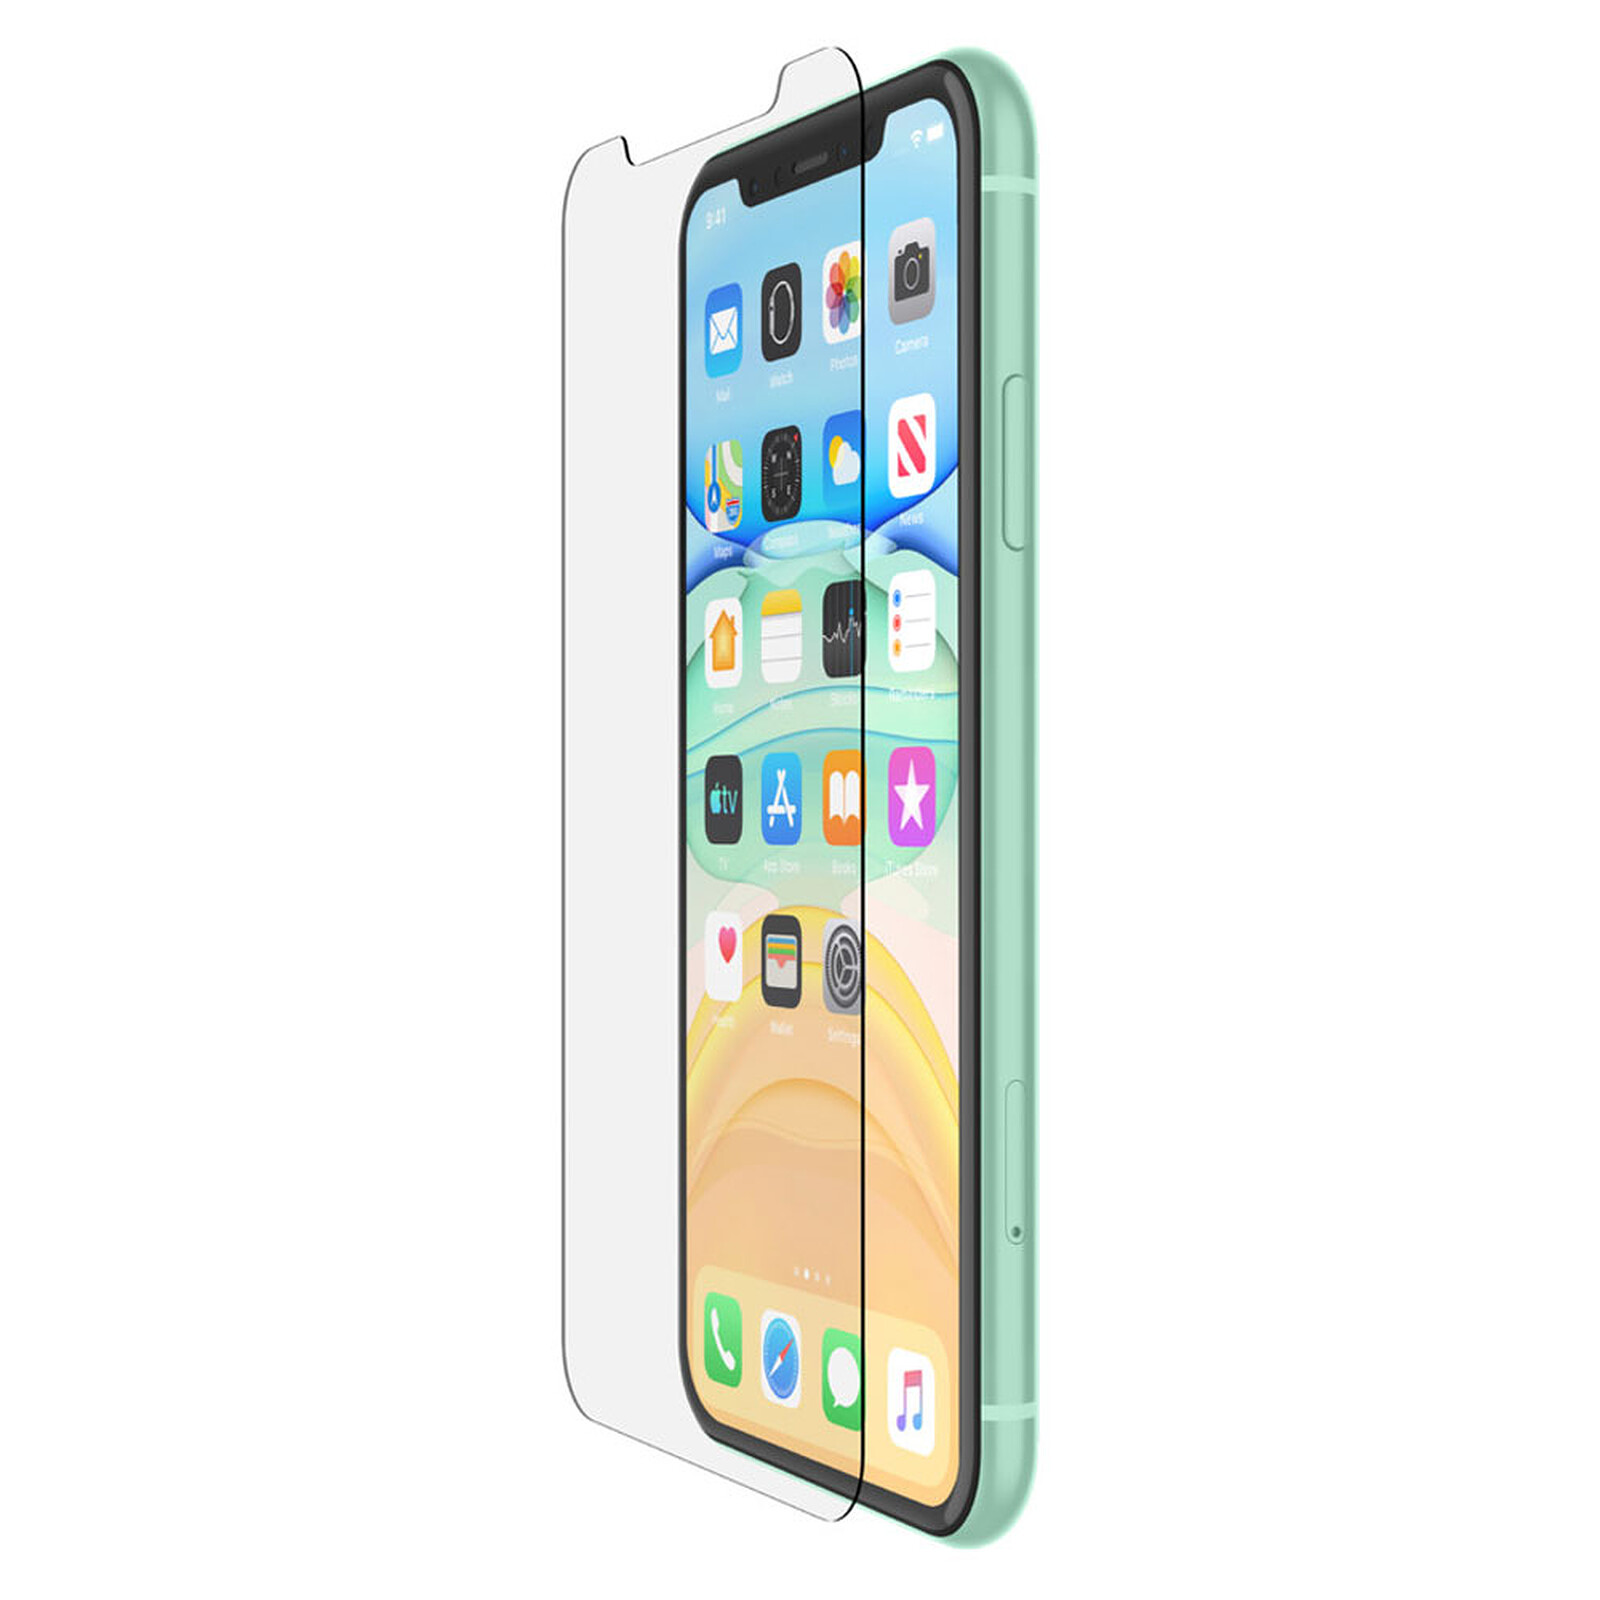 Belkin Tempered Glass For Iphone 11 Xr Screen Protection Belkin On Ldlc